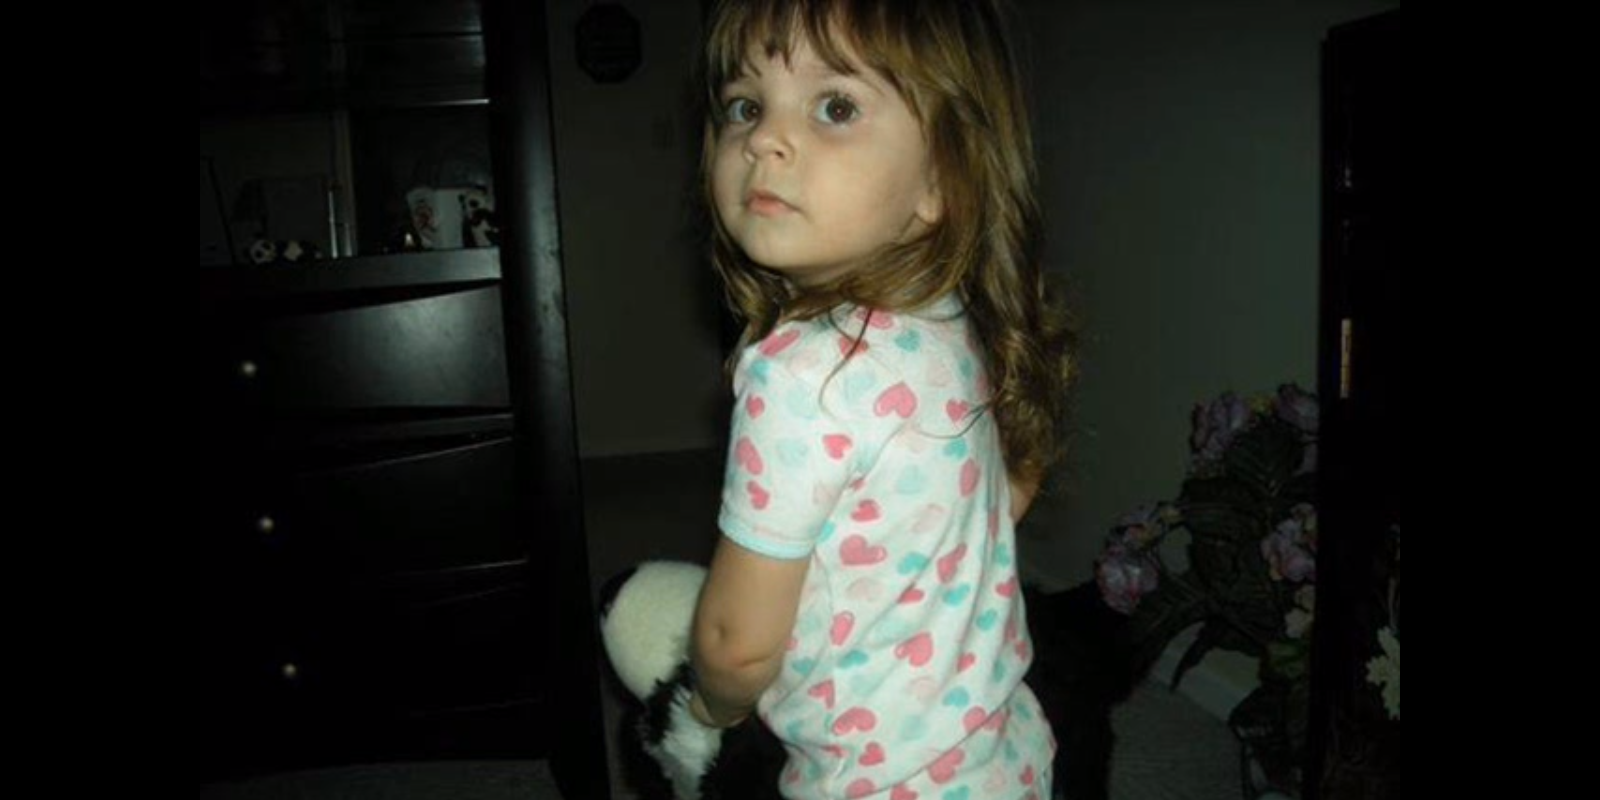 15 Things You Didn't Know About Casey Anthony's Daughter, Caylee